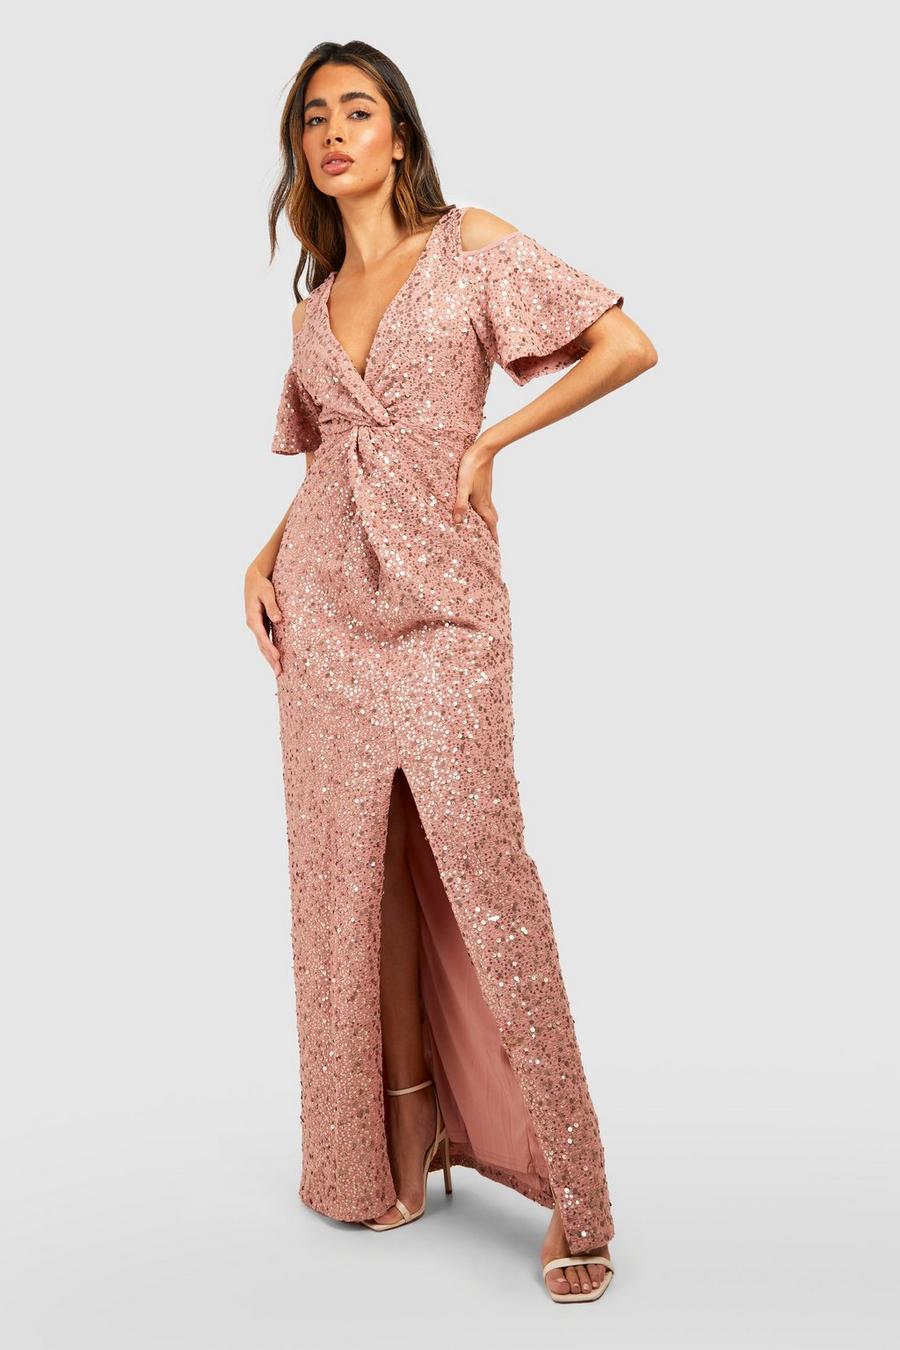 Blush pink Bridesmaid Occasion Sequin Tie Front Maxi Dress